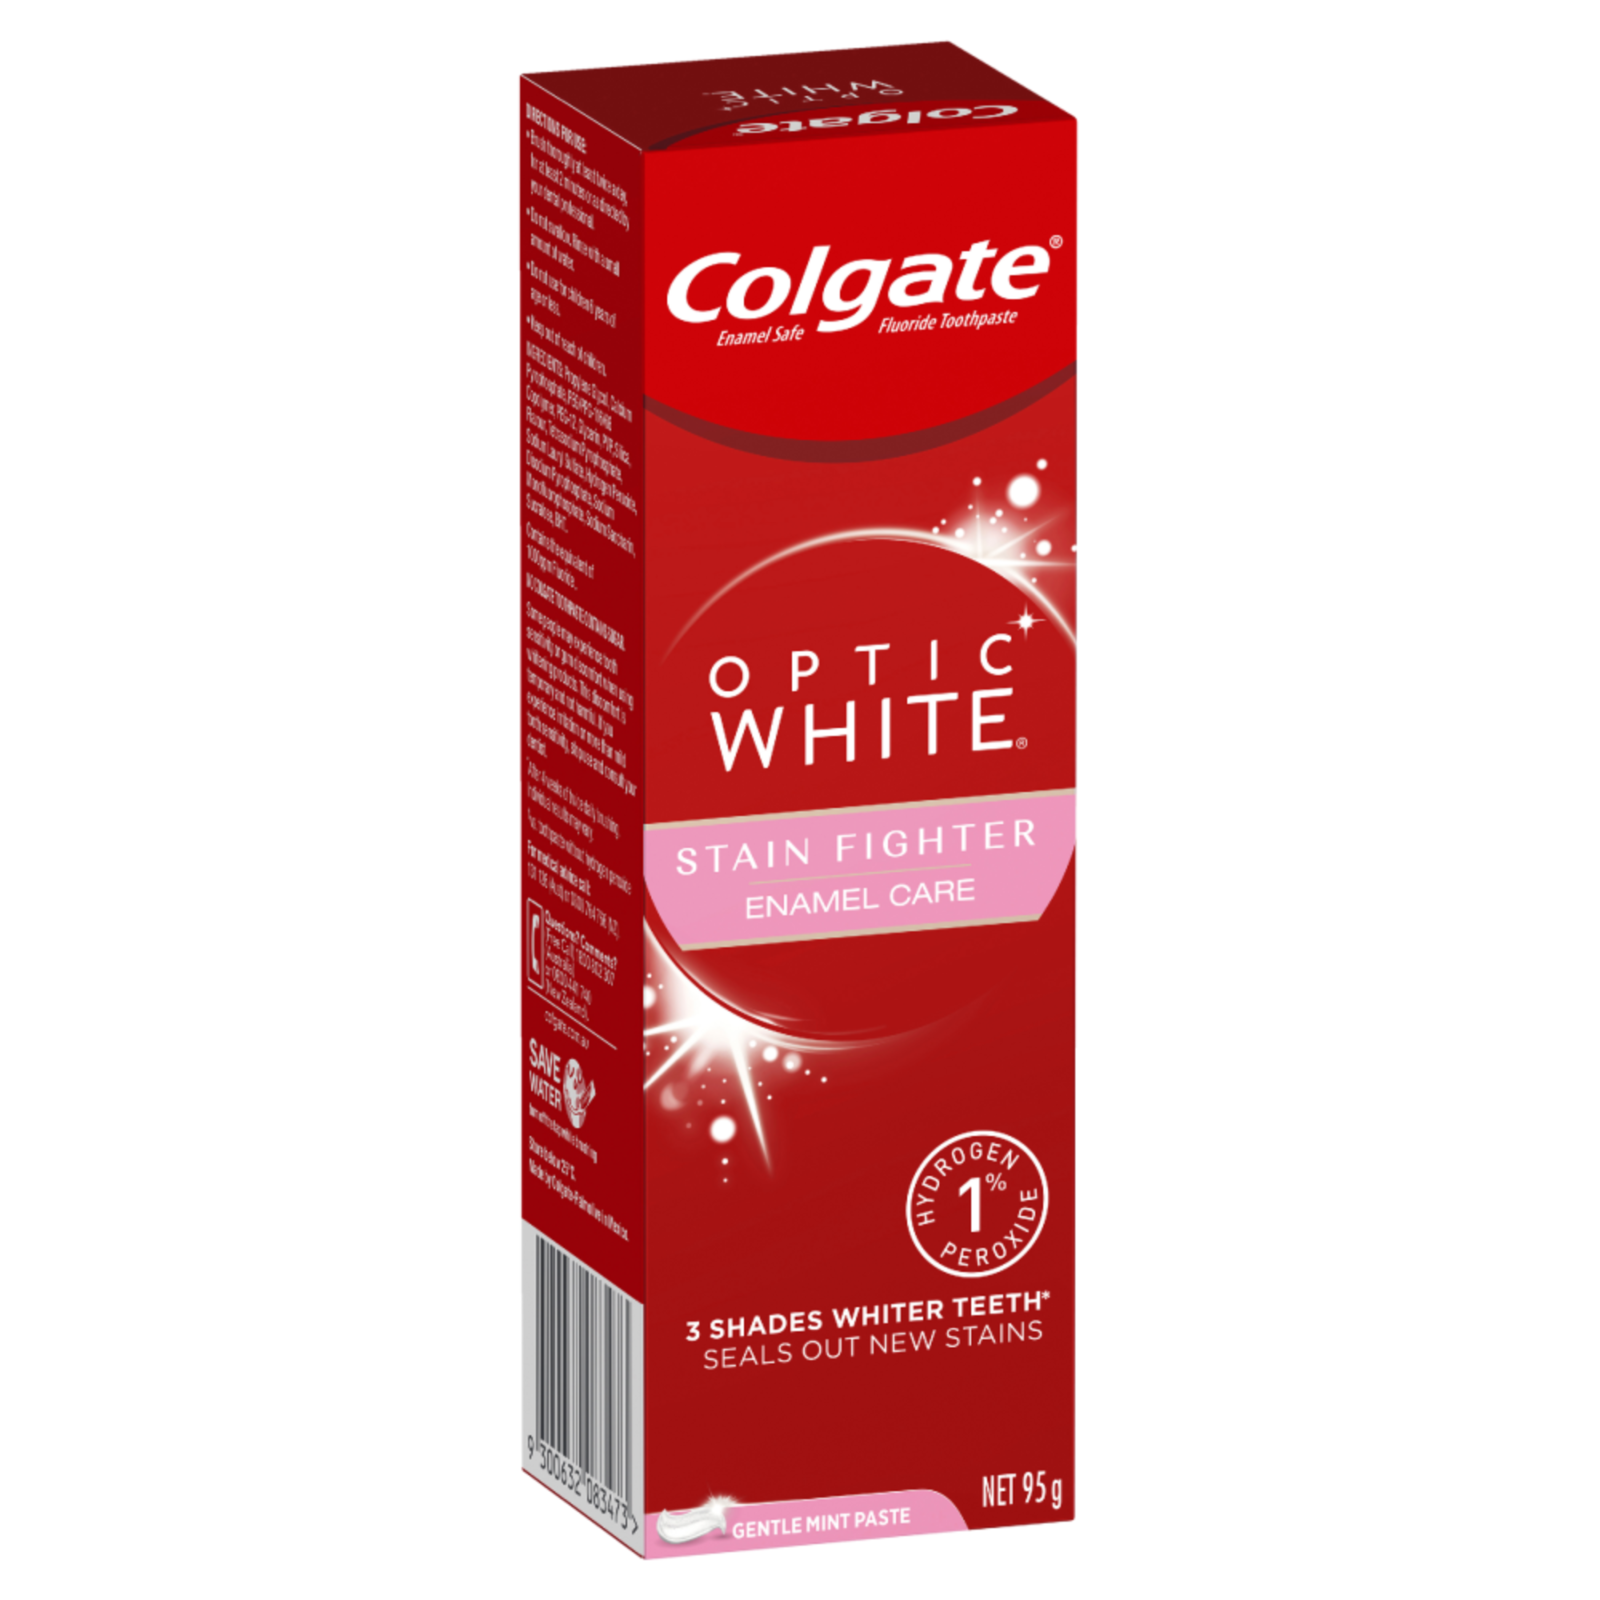 Colgate Optic White Stain Fighter Toothpaste 95g – Gentle Mint - $74.86